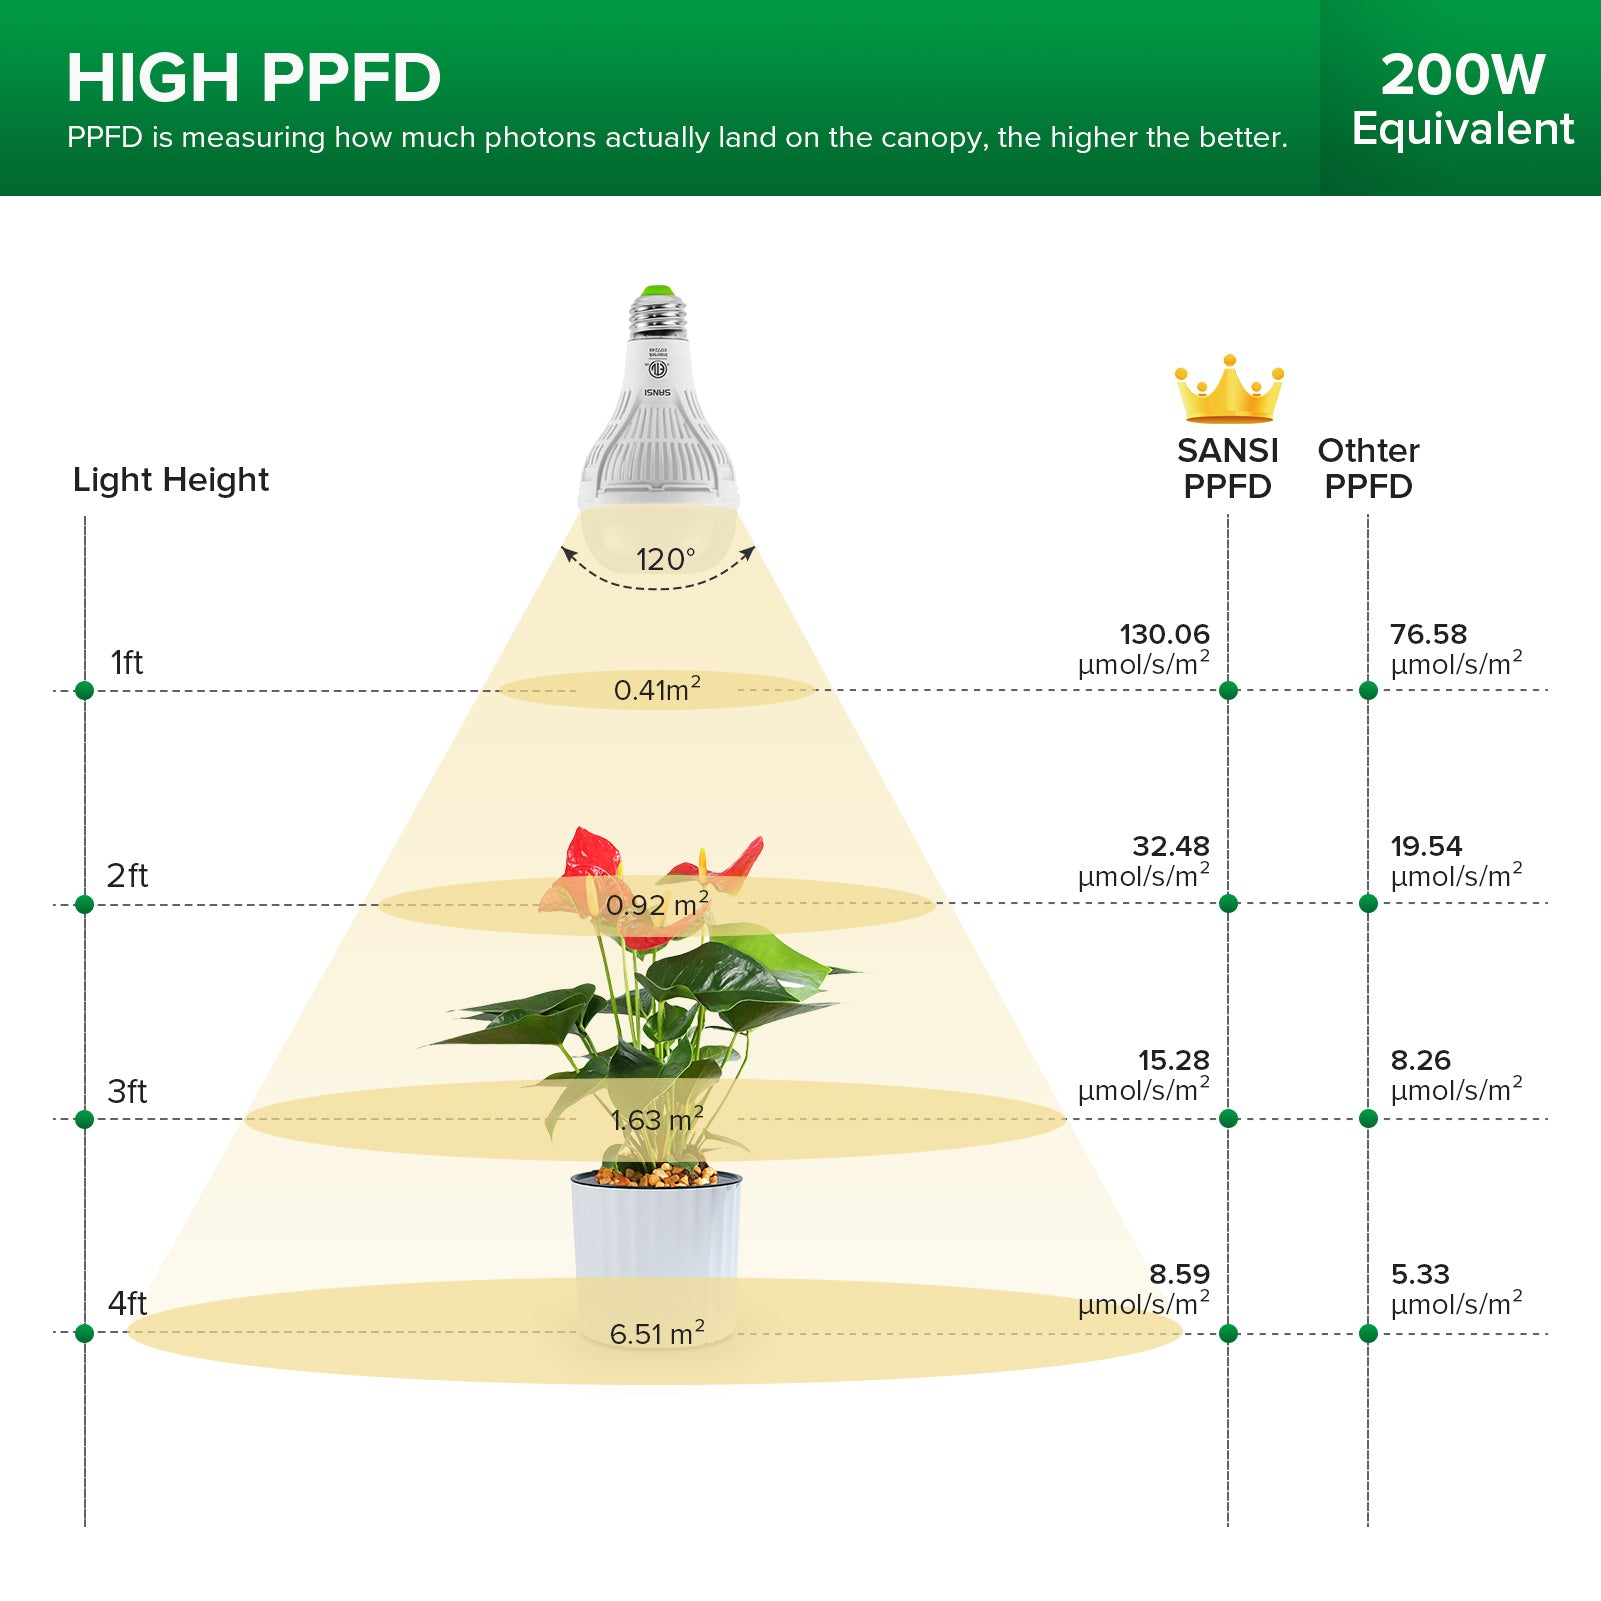 A21 15W LED Grow Light Bulbs have high PPFD,PPFD is measuring how much photons actually land on the canopy, the higher the better.